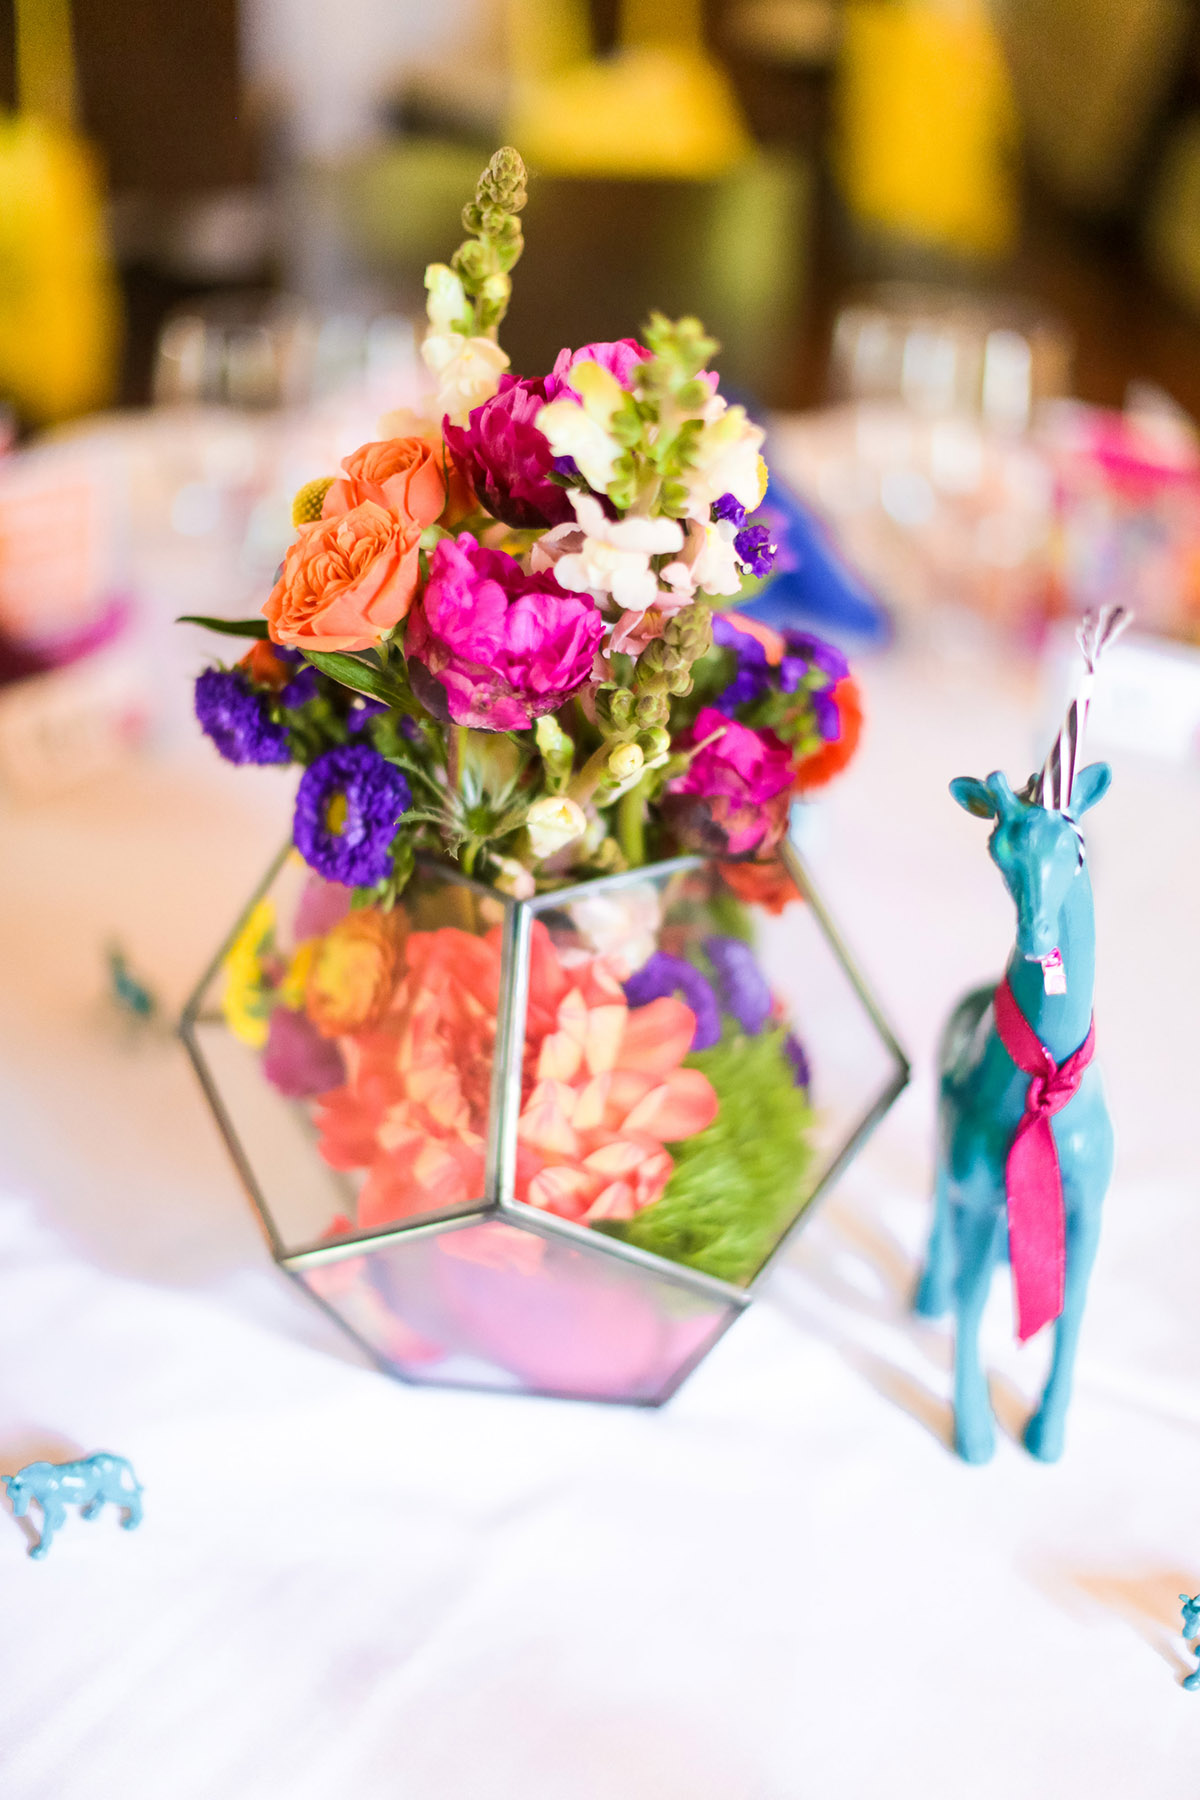 Bright and Cheerful 10th Anniversary Party Decor from A Well Crafted Party, photo by Mary Boyden